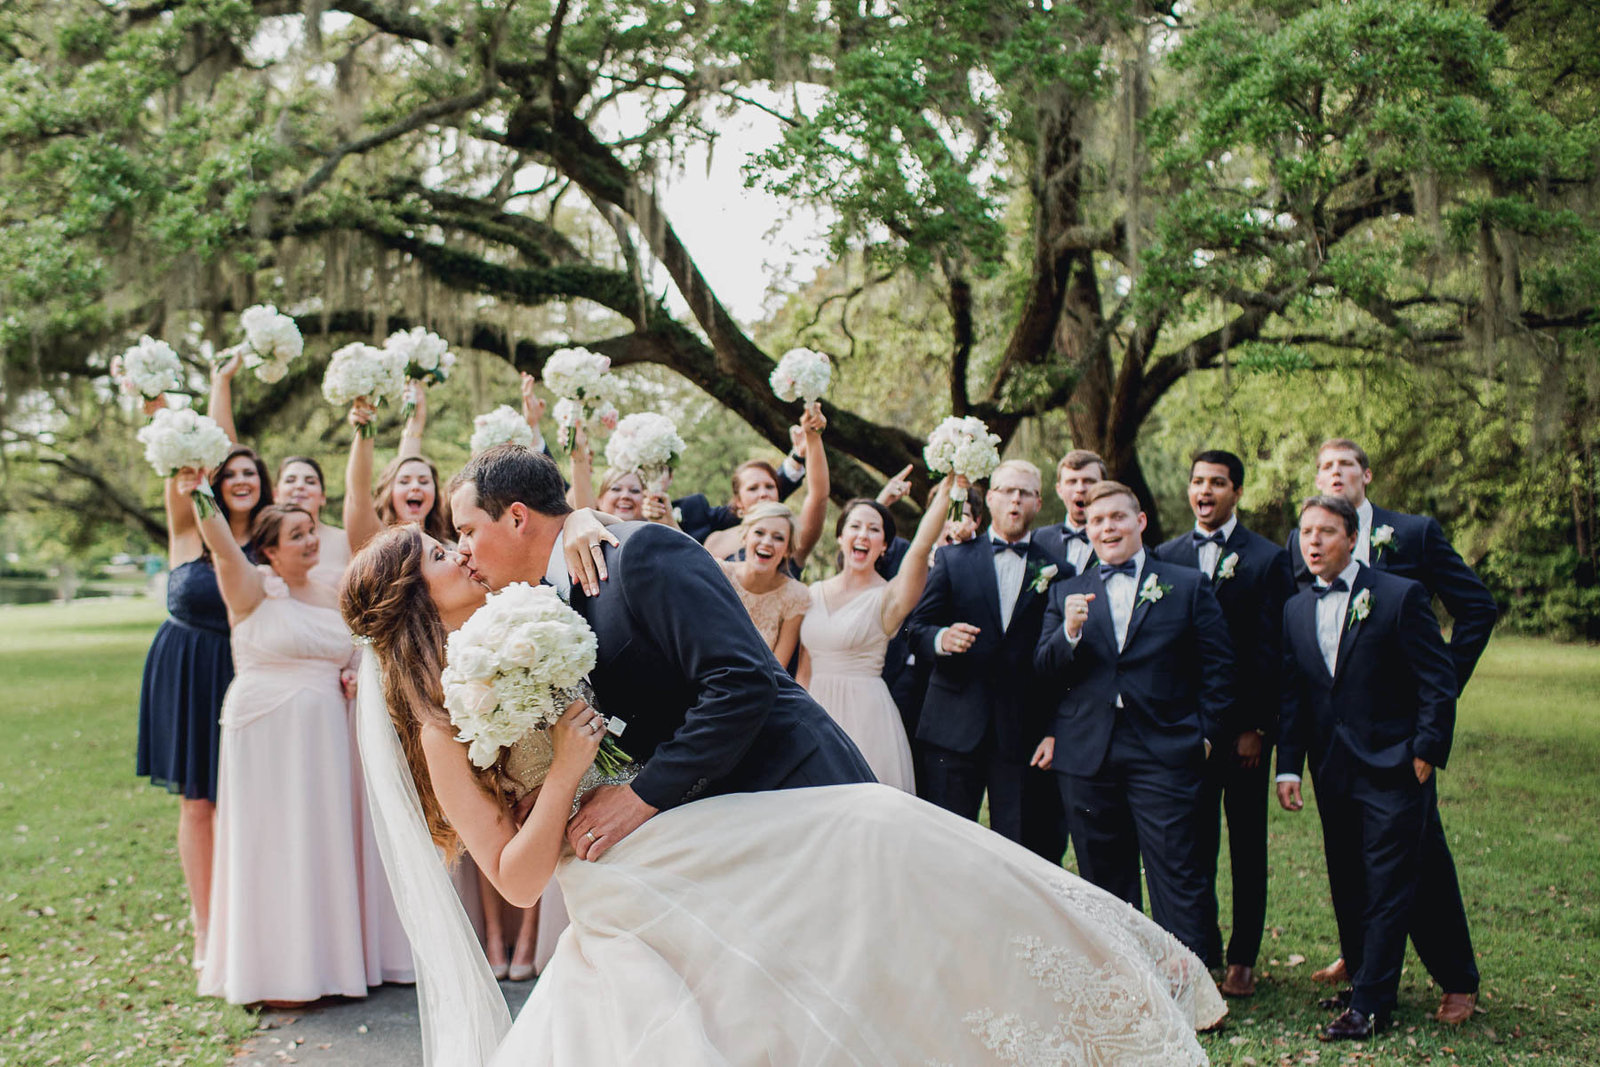 Bride and groom kiss while wedding party cheers, Brookgreen Gardens, Murrells Inlet, South Carolina. Kate Timbers Photography.